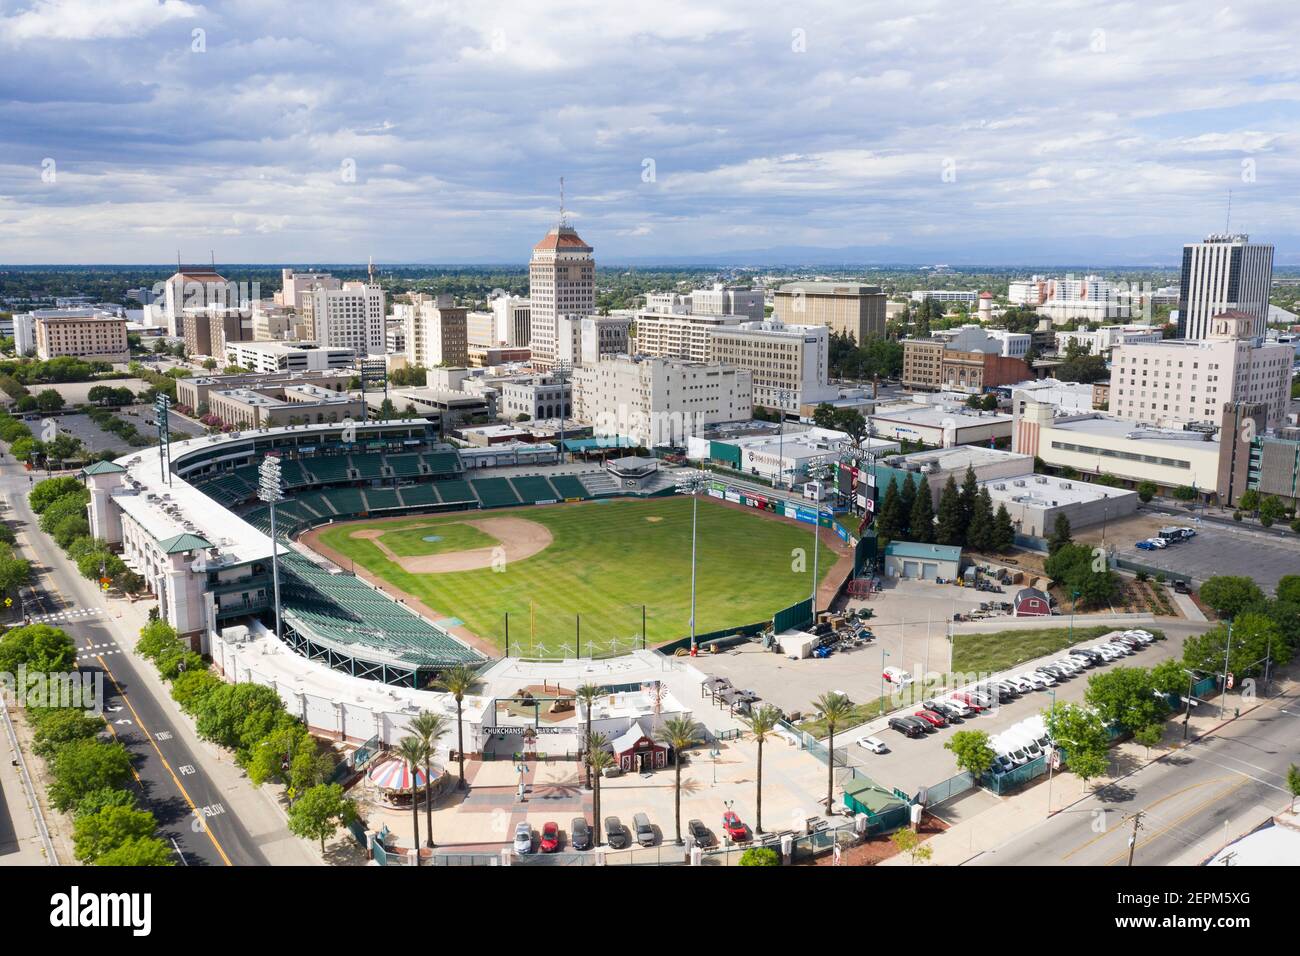 Aerial view of Chukchansi Park baseball stadium in downtown Fresno, home of the Grizzlies team Stock Photo